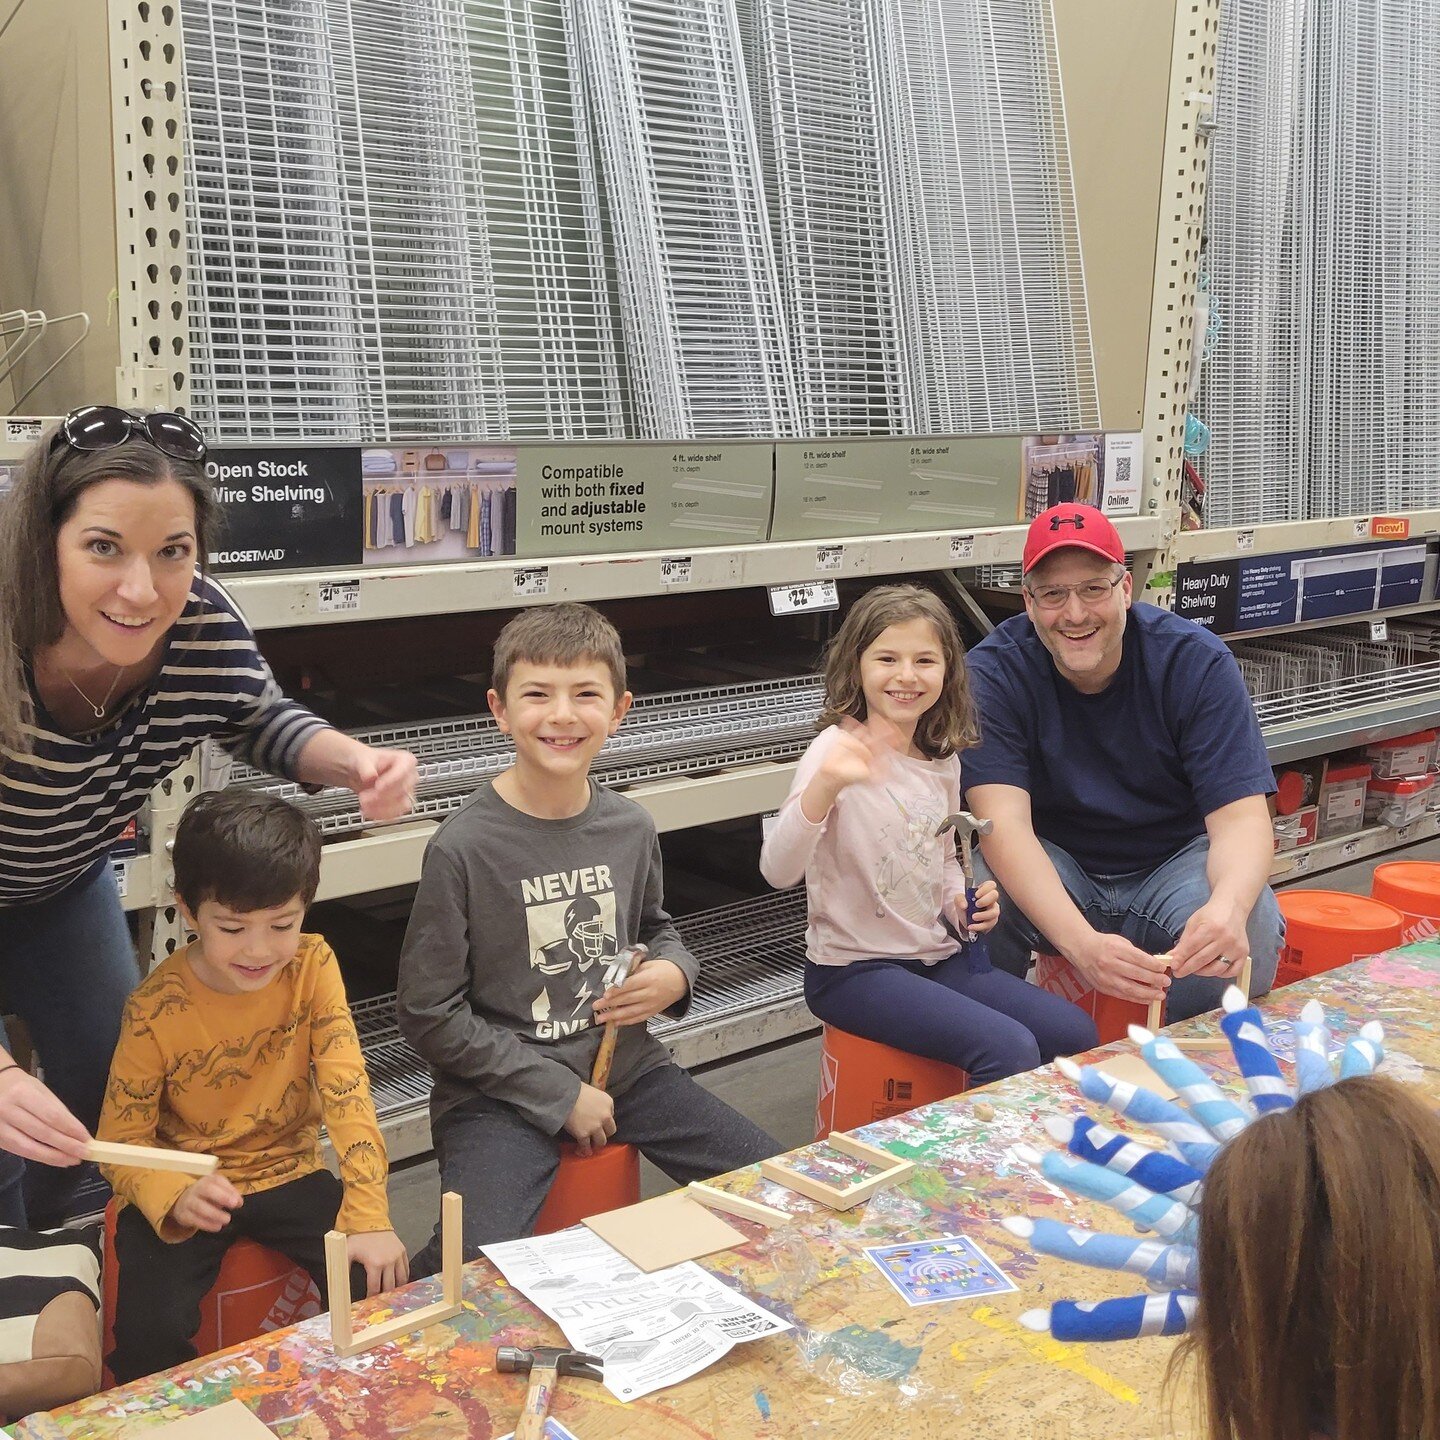 I'm sure you don't think of Chanukah when hearing the words Home Depot, or maybe now you do after attending our annual Chanukah Workshop at the Home Depot in Cornelius. 

We got ready for Chanukah by making our own dreidel sets. The smiles and concen